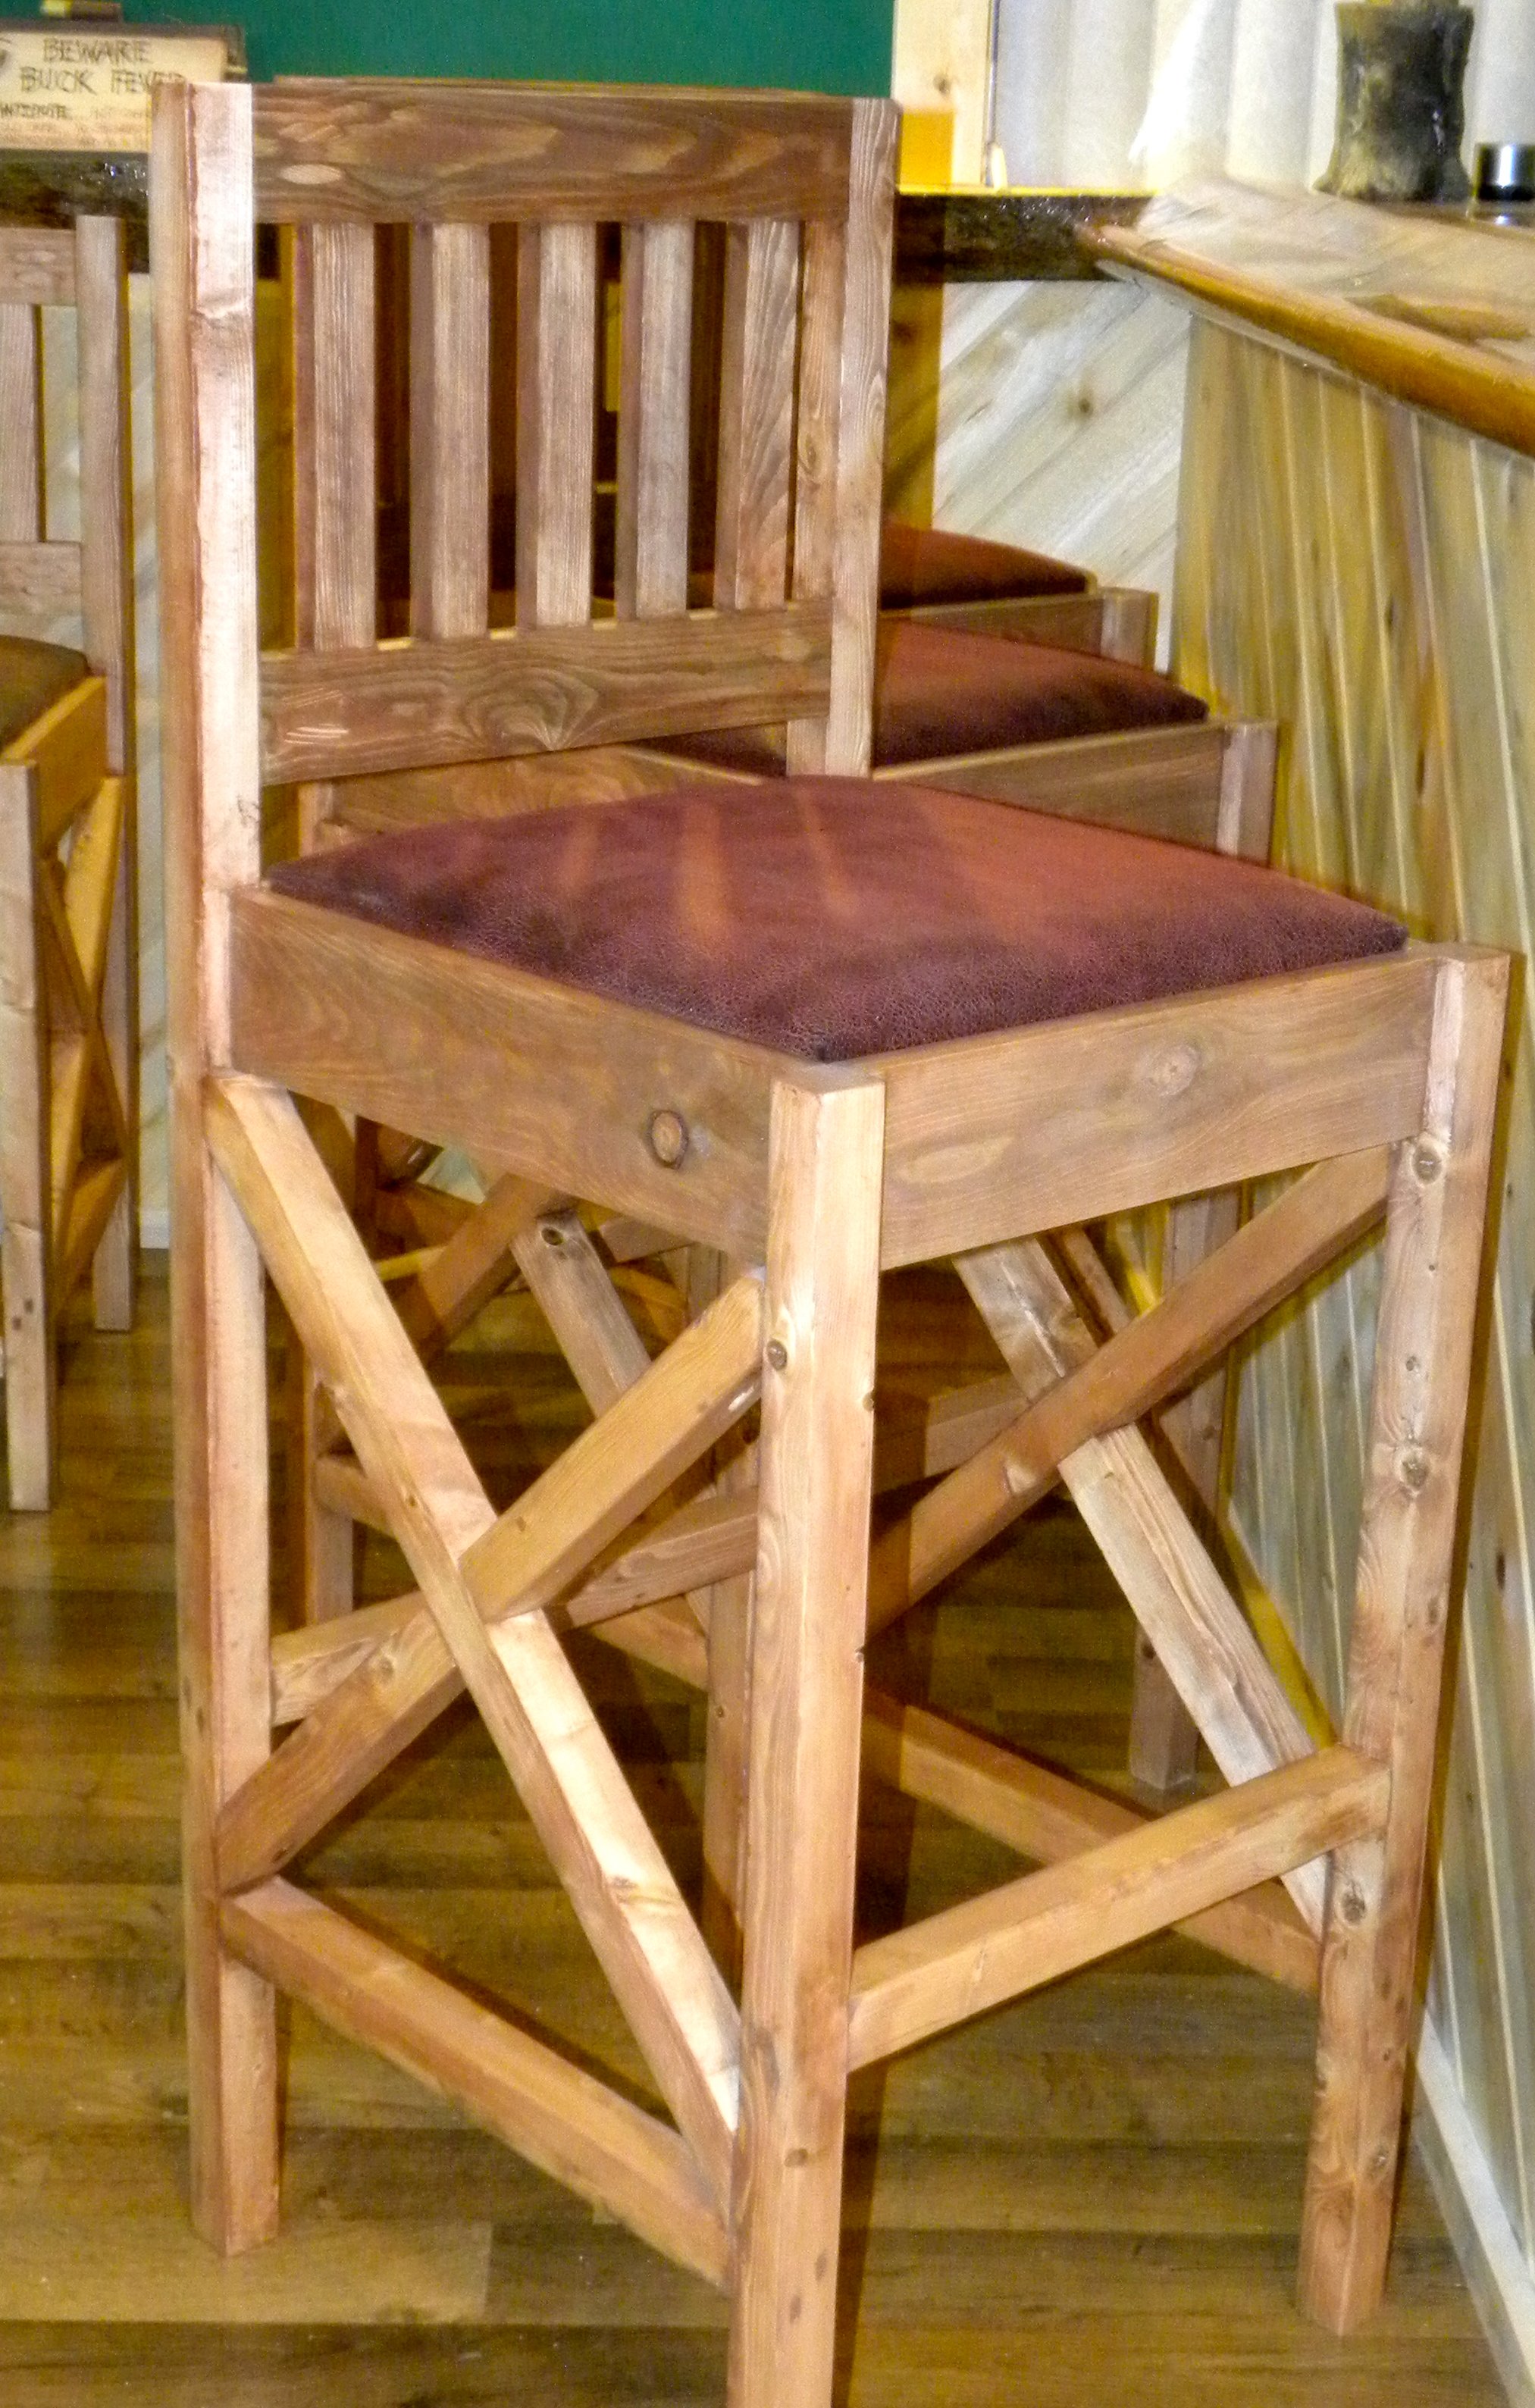 Rustic Bar Stools | Do It Yourself Home Projects from Ana White